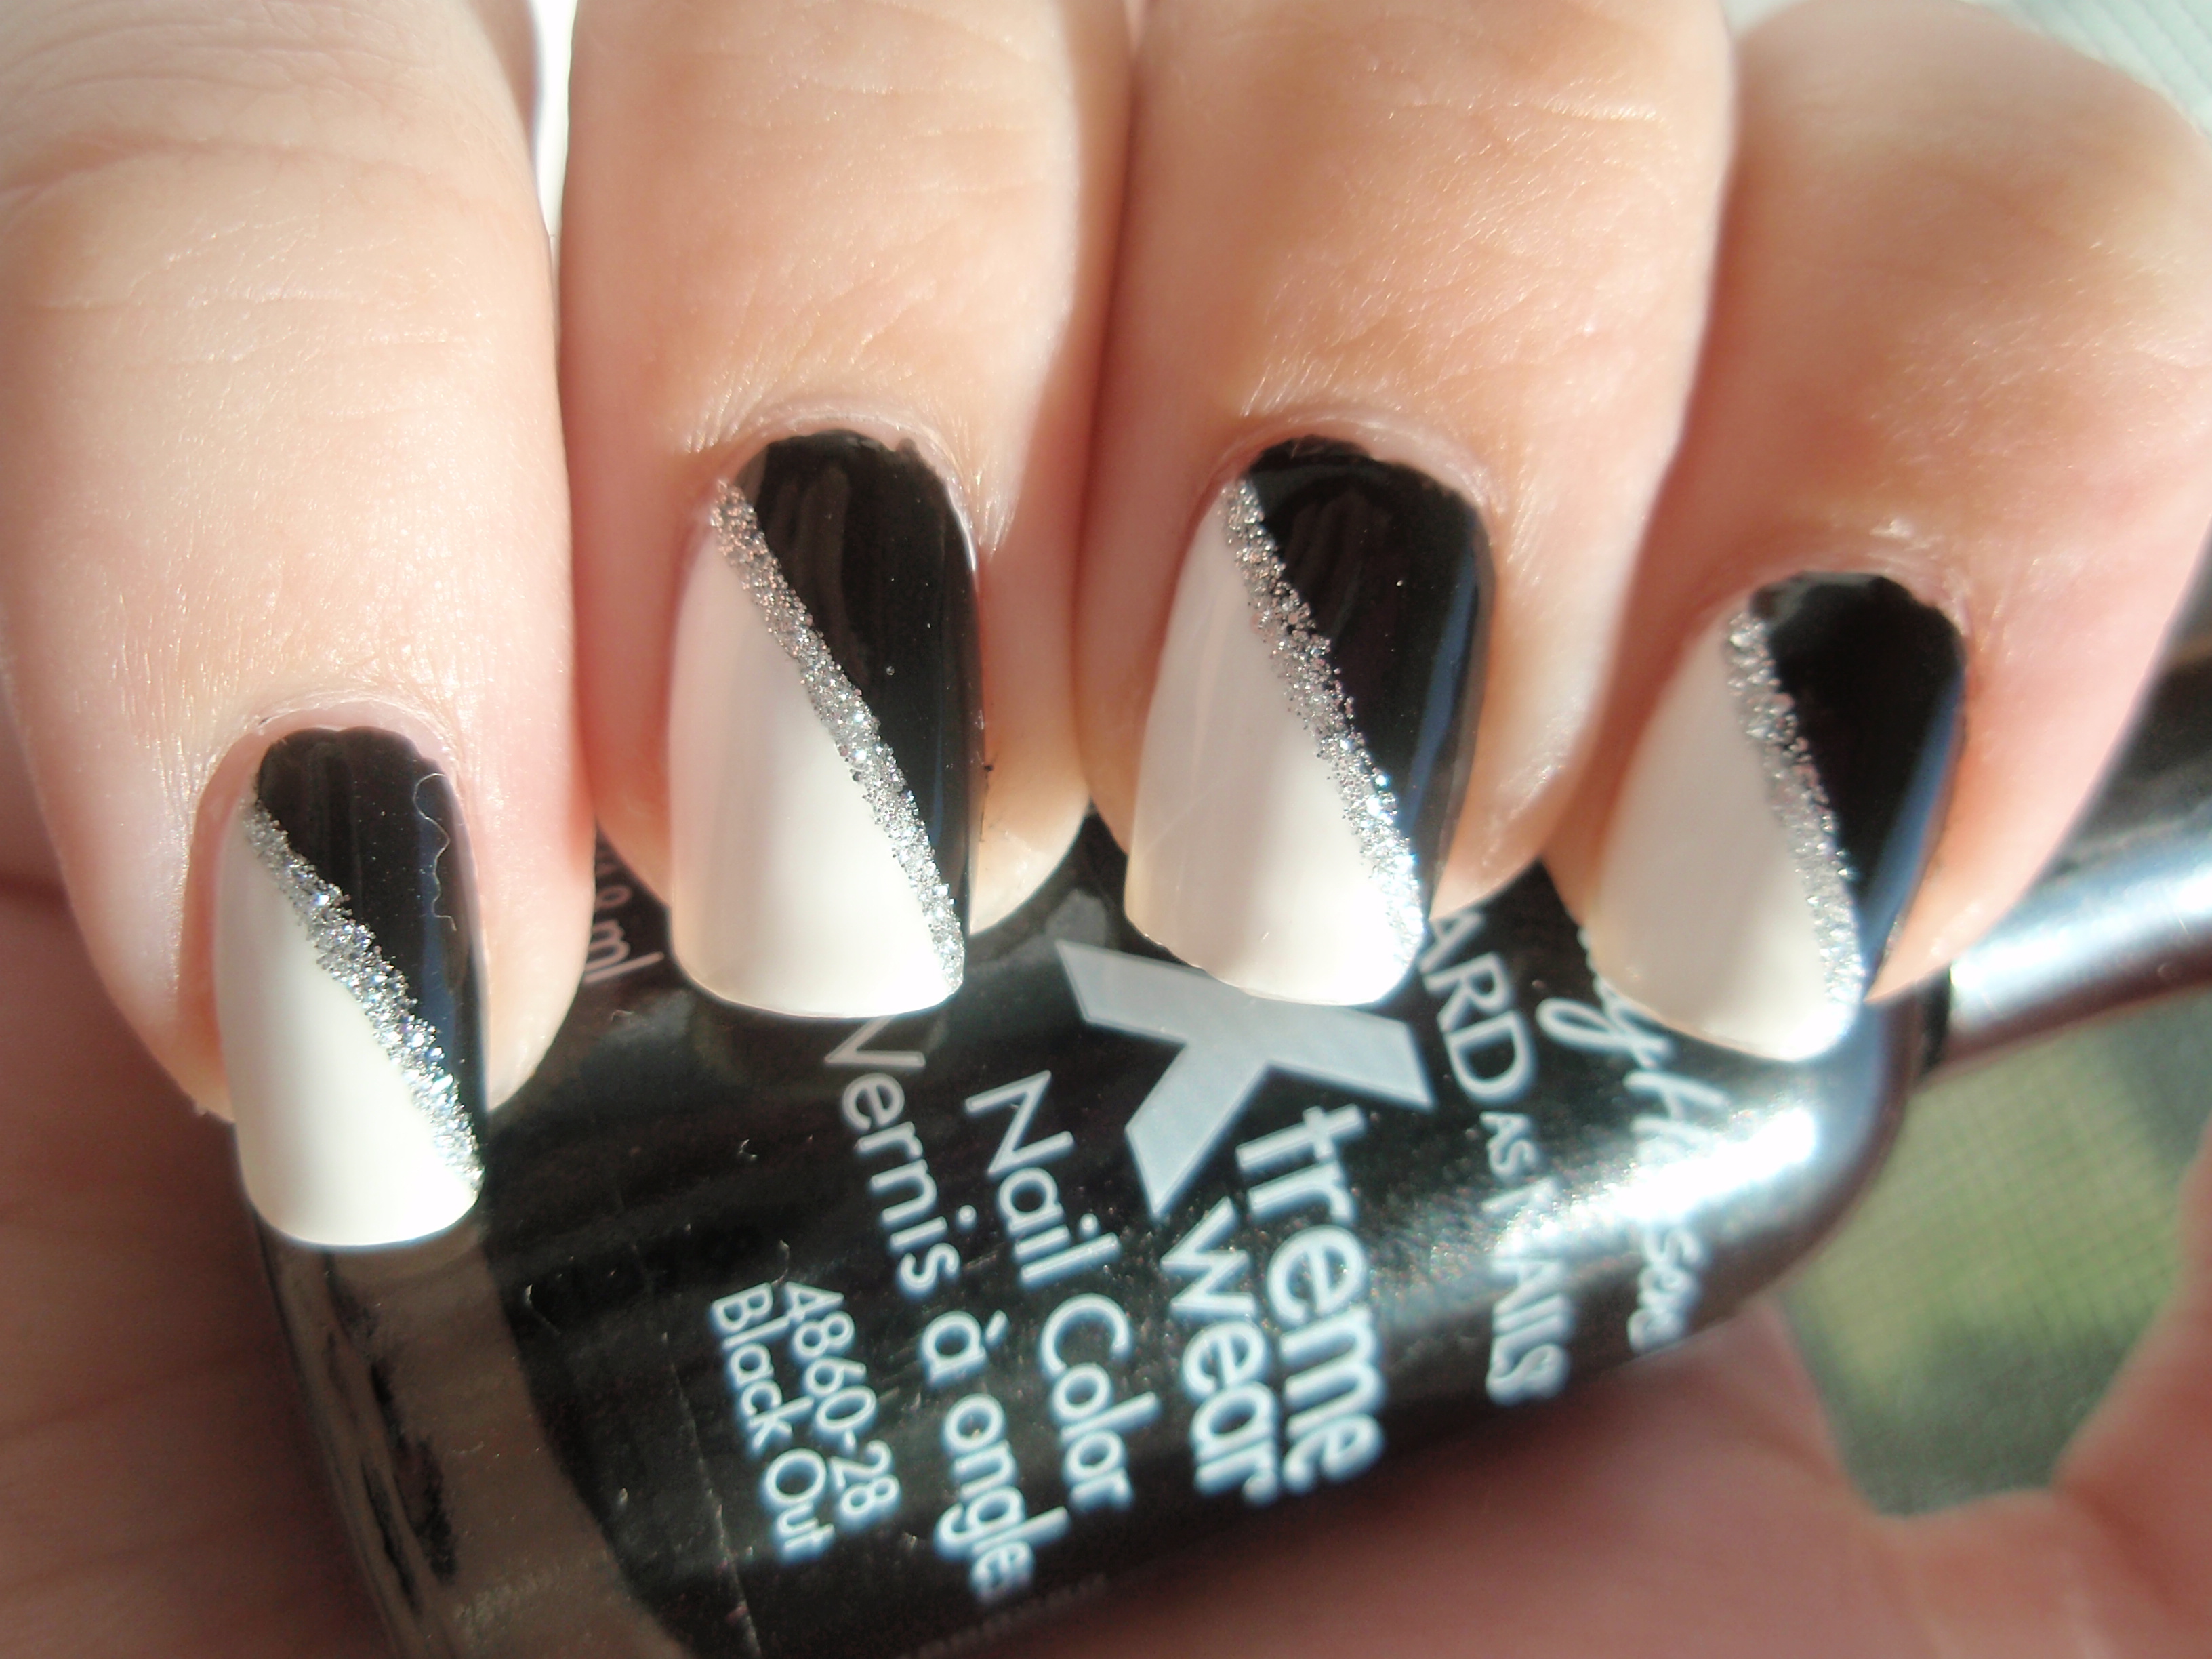 Galery of black and white nail designs.